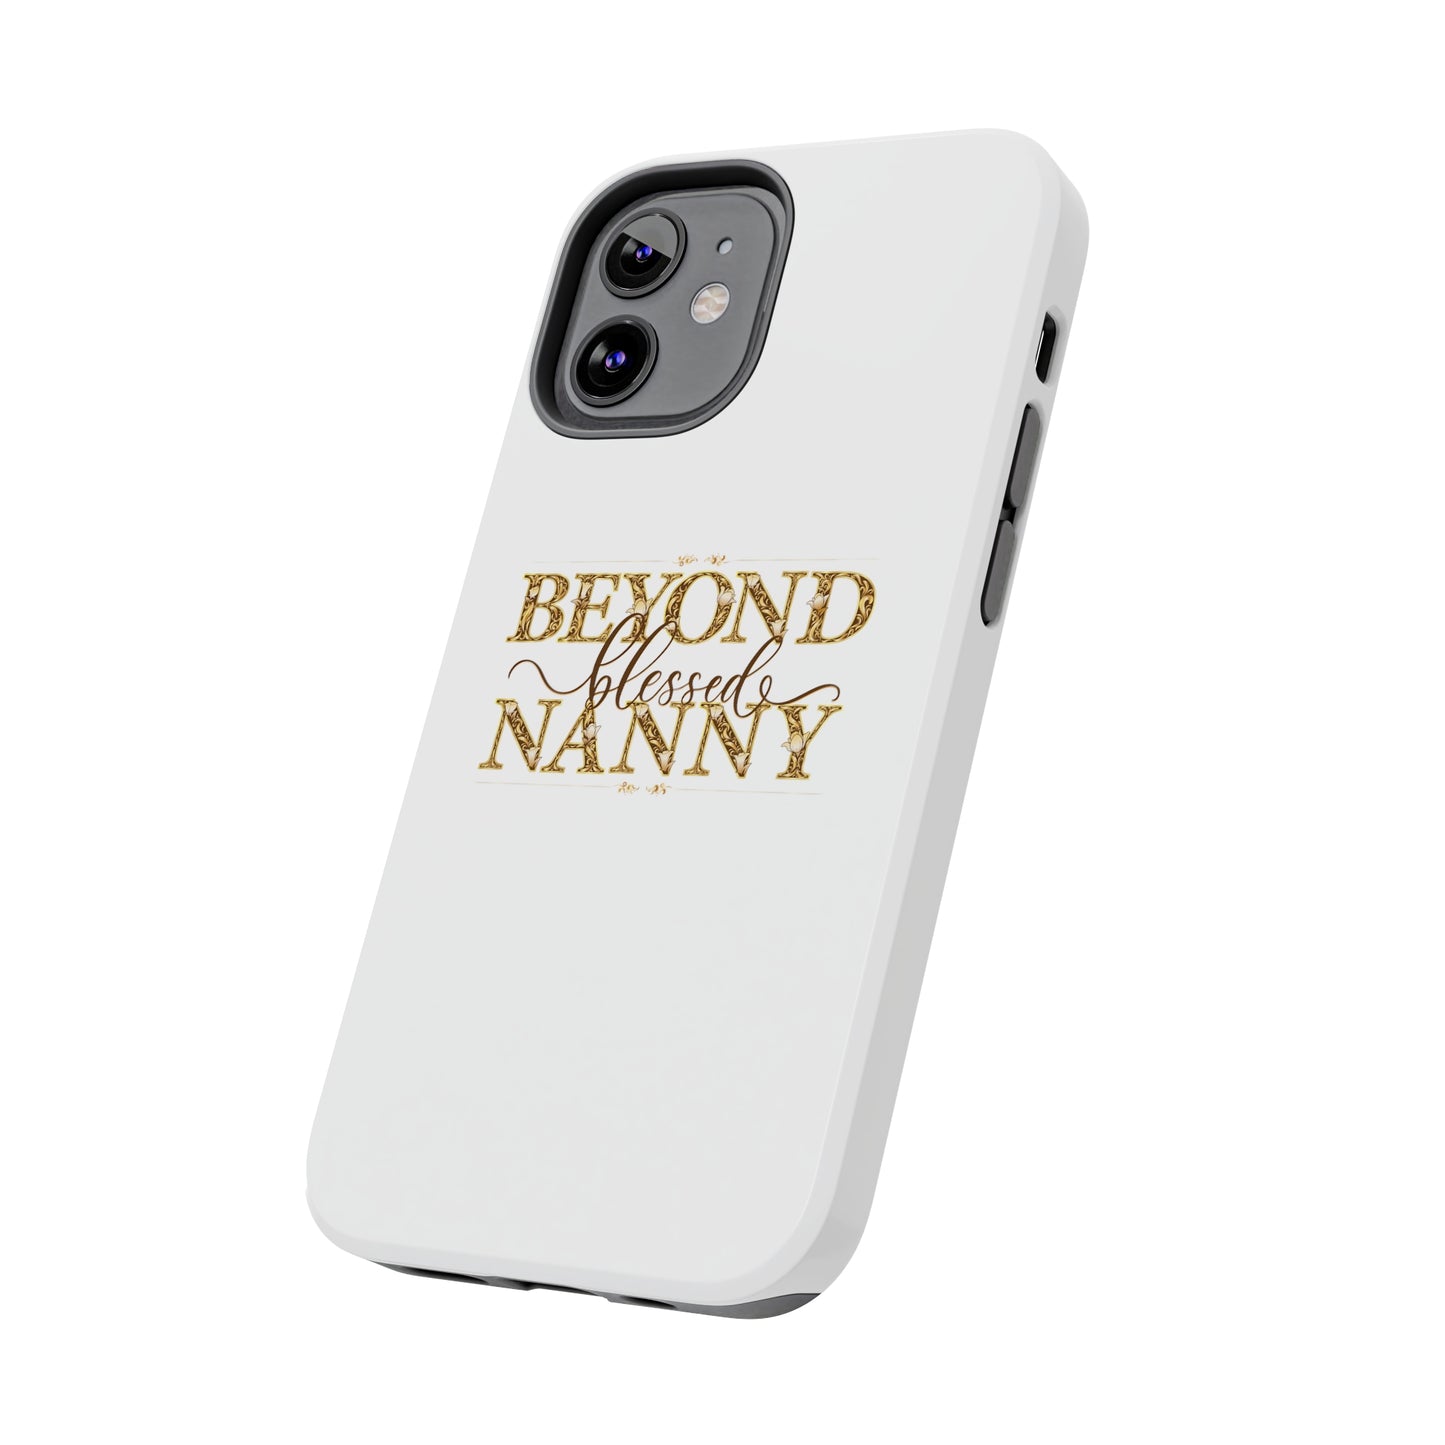 Beyond Blessed Nanny - Brown - Tough Phone Cases